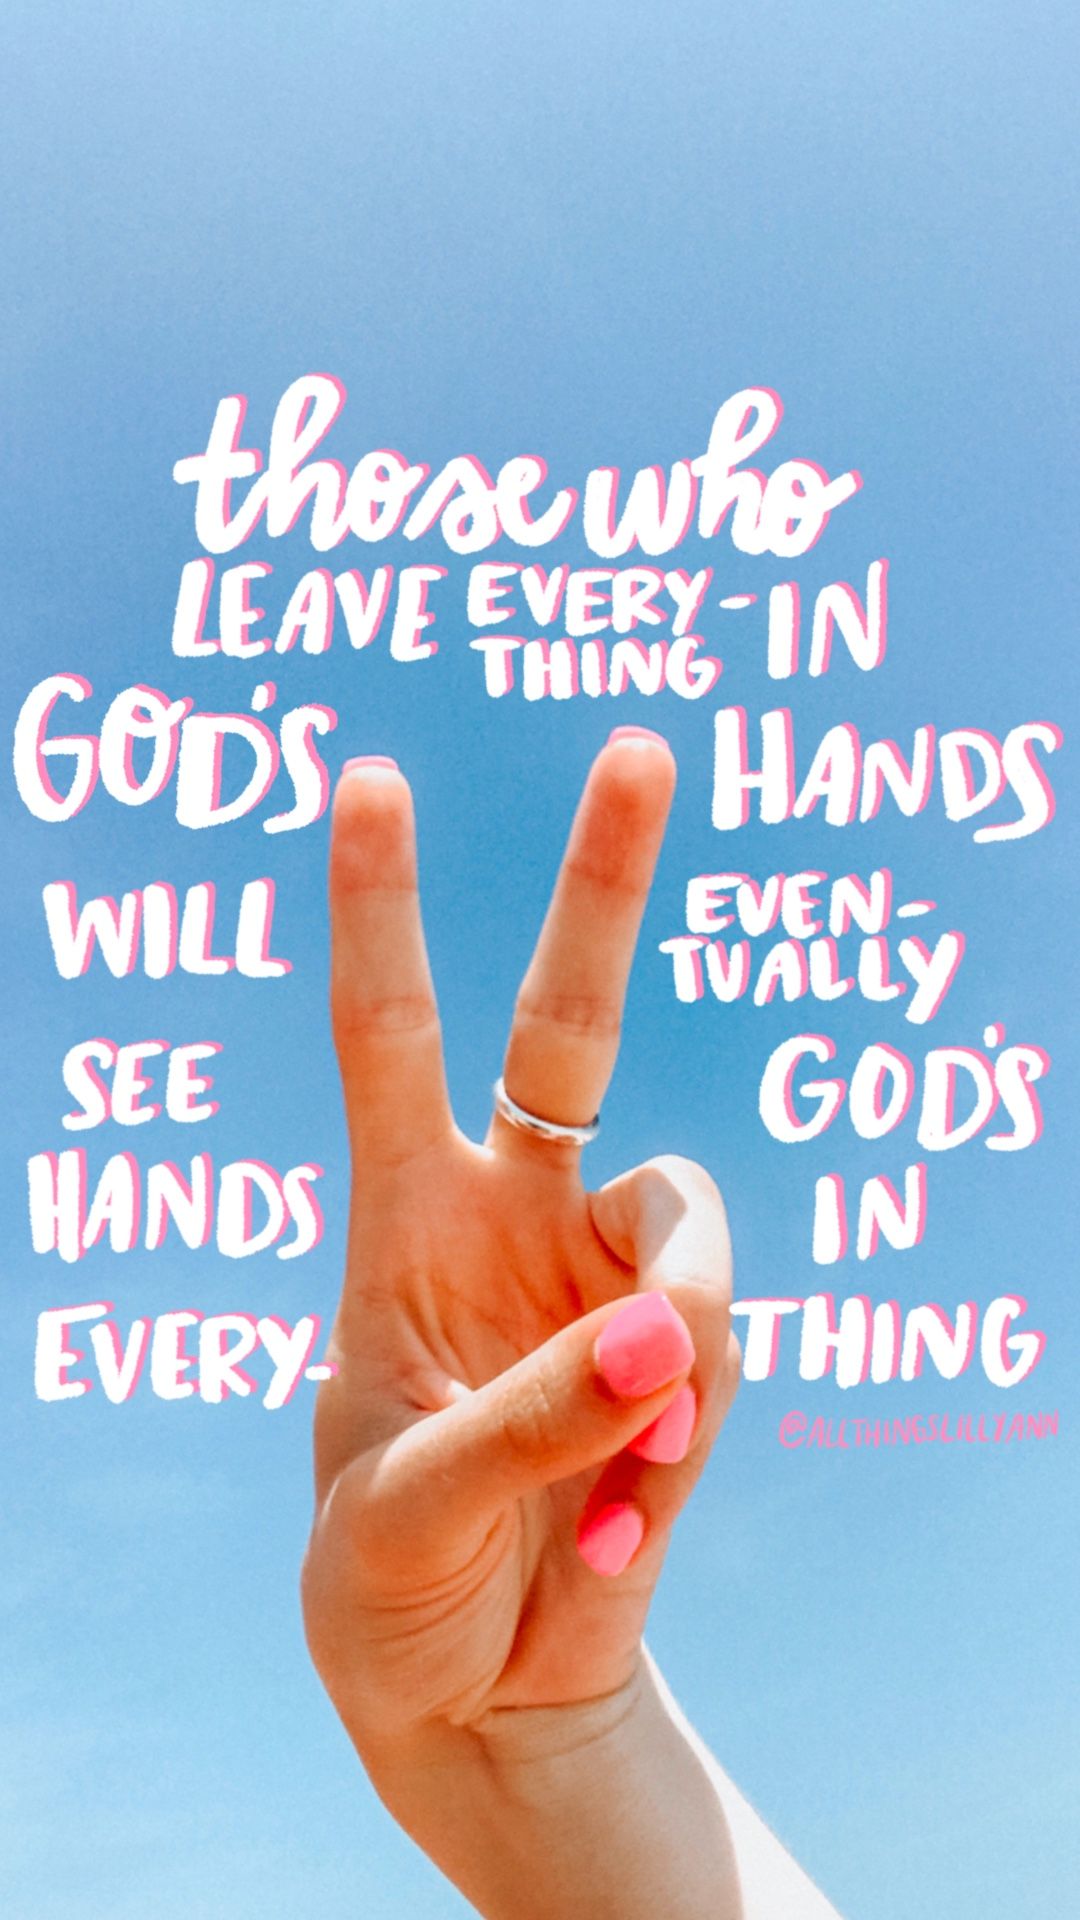 Christian quotes bible god Jesus iPhone wallpaper background